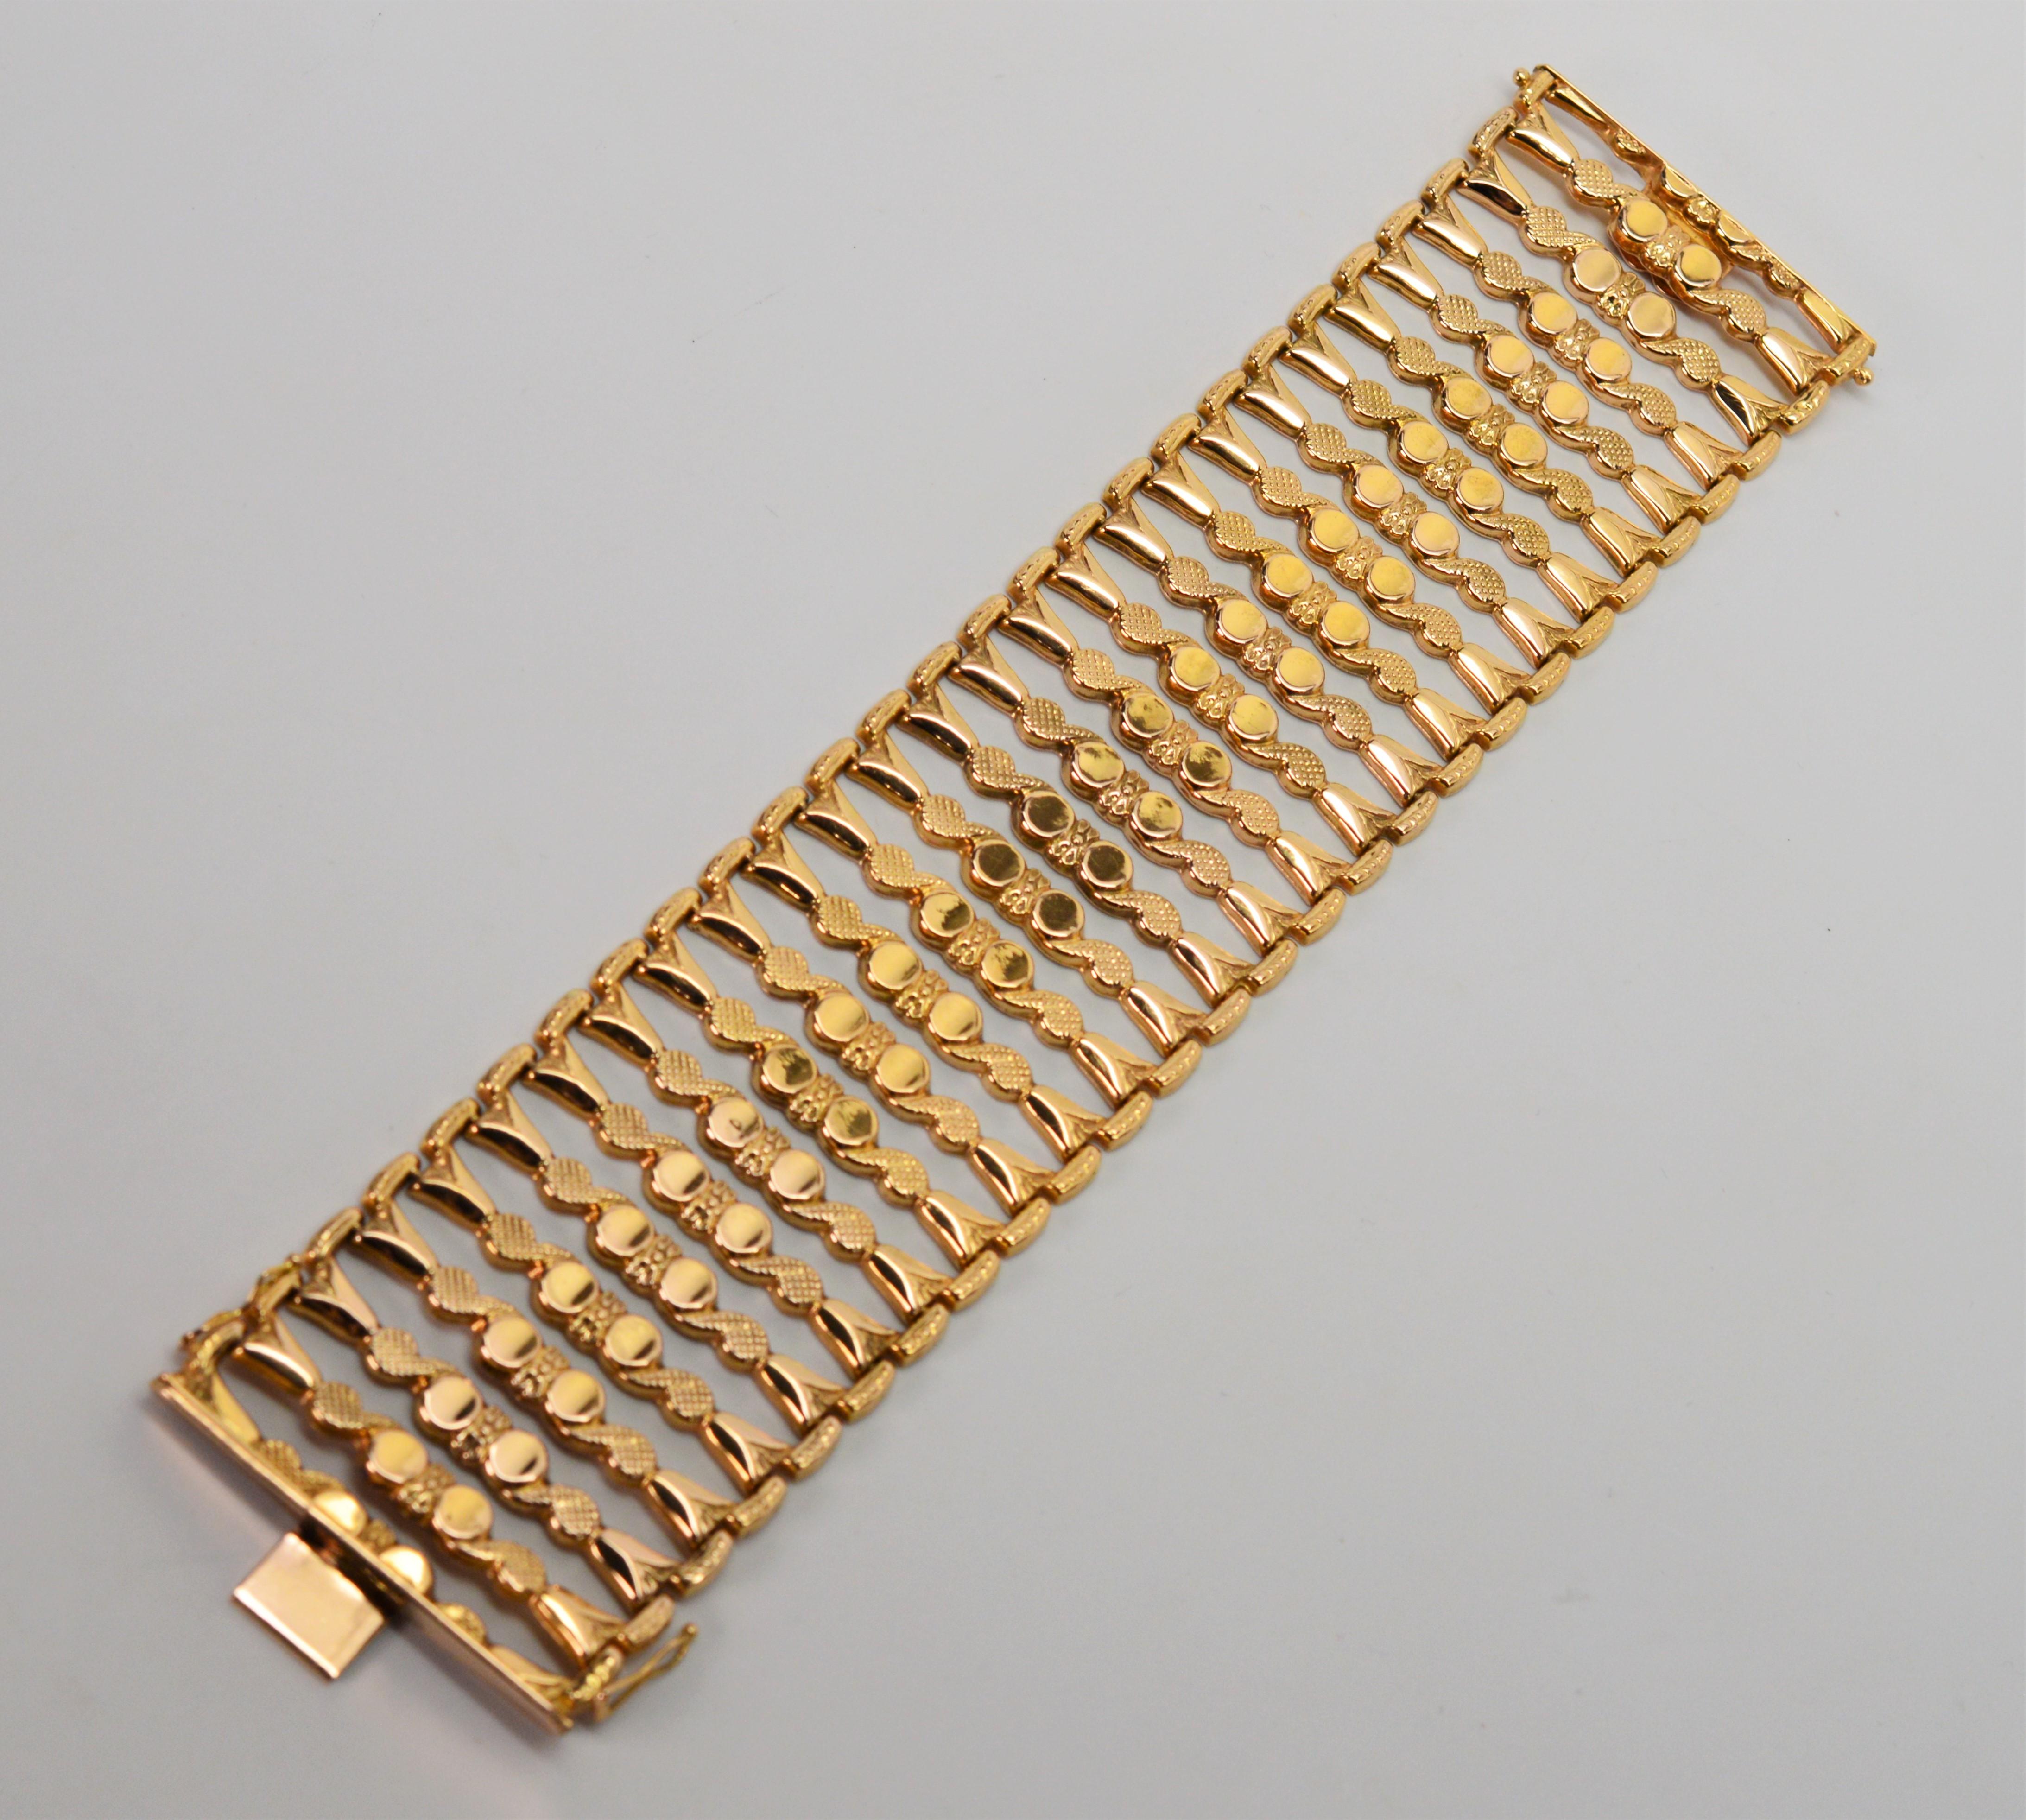 Italian 18 Karat Yellow Gold Wide Ladder Link Bracelet In Excellent Condition For Sale In Mount Kisco, NY